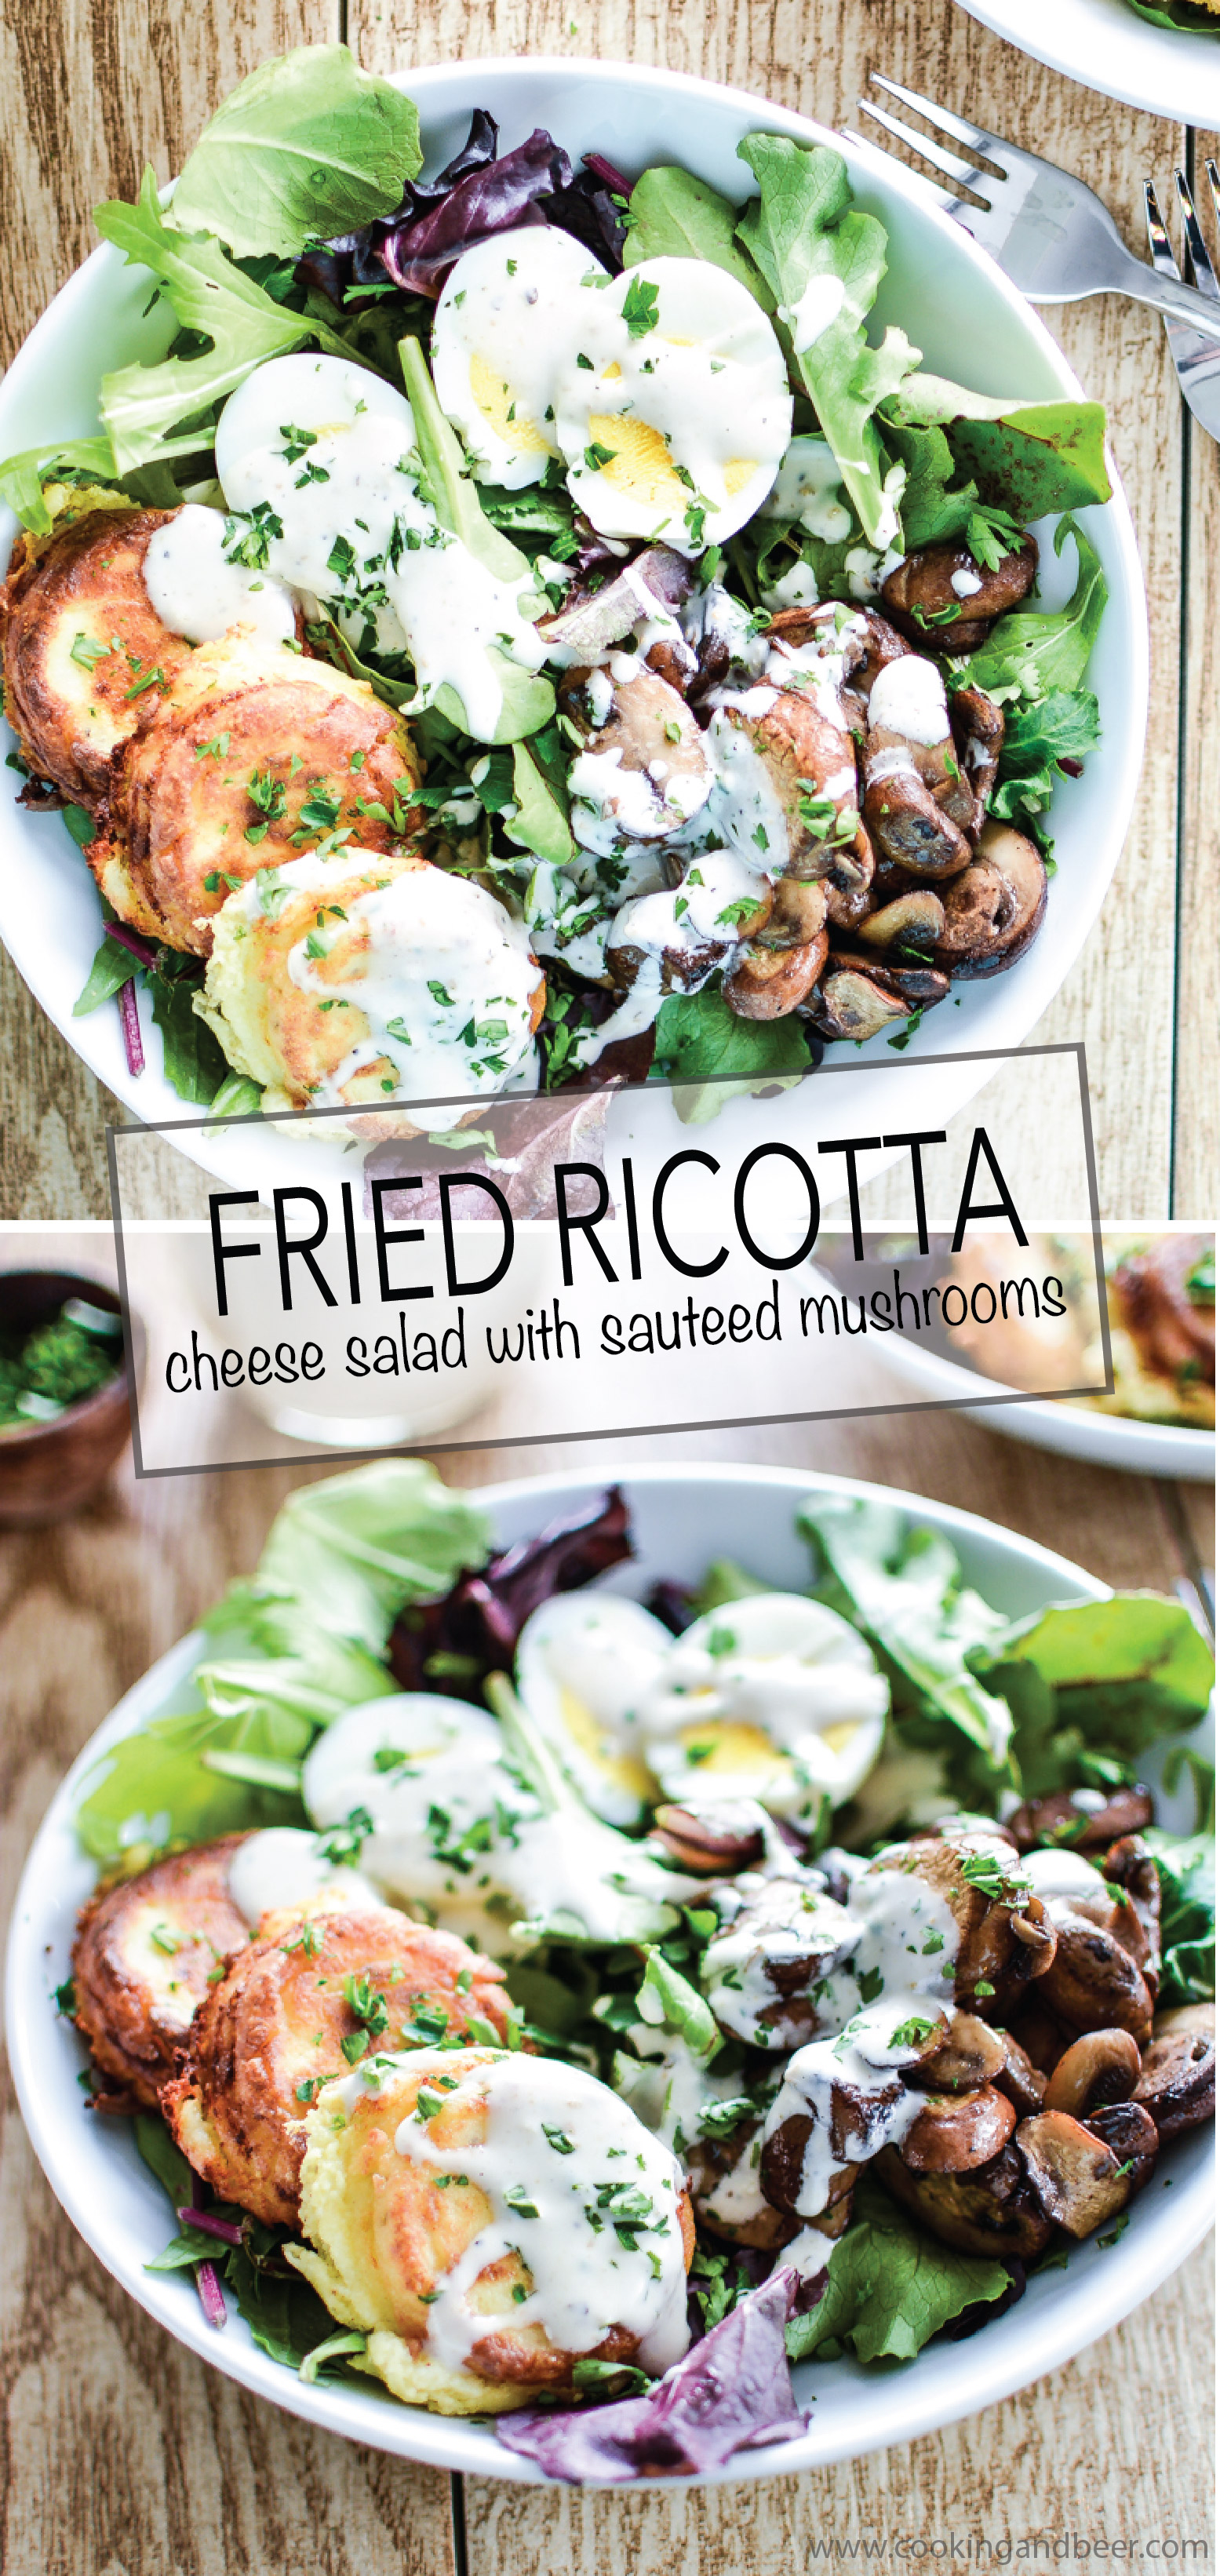 Recipe for Fried Ricotta Cheese Salad with Sautéed Mushrooms is a fun way to get that daily green intake! | www.cookingandbeer.com